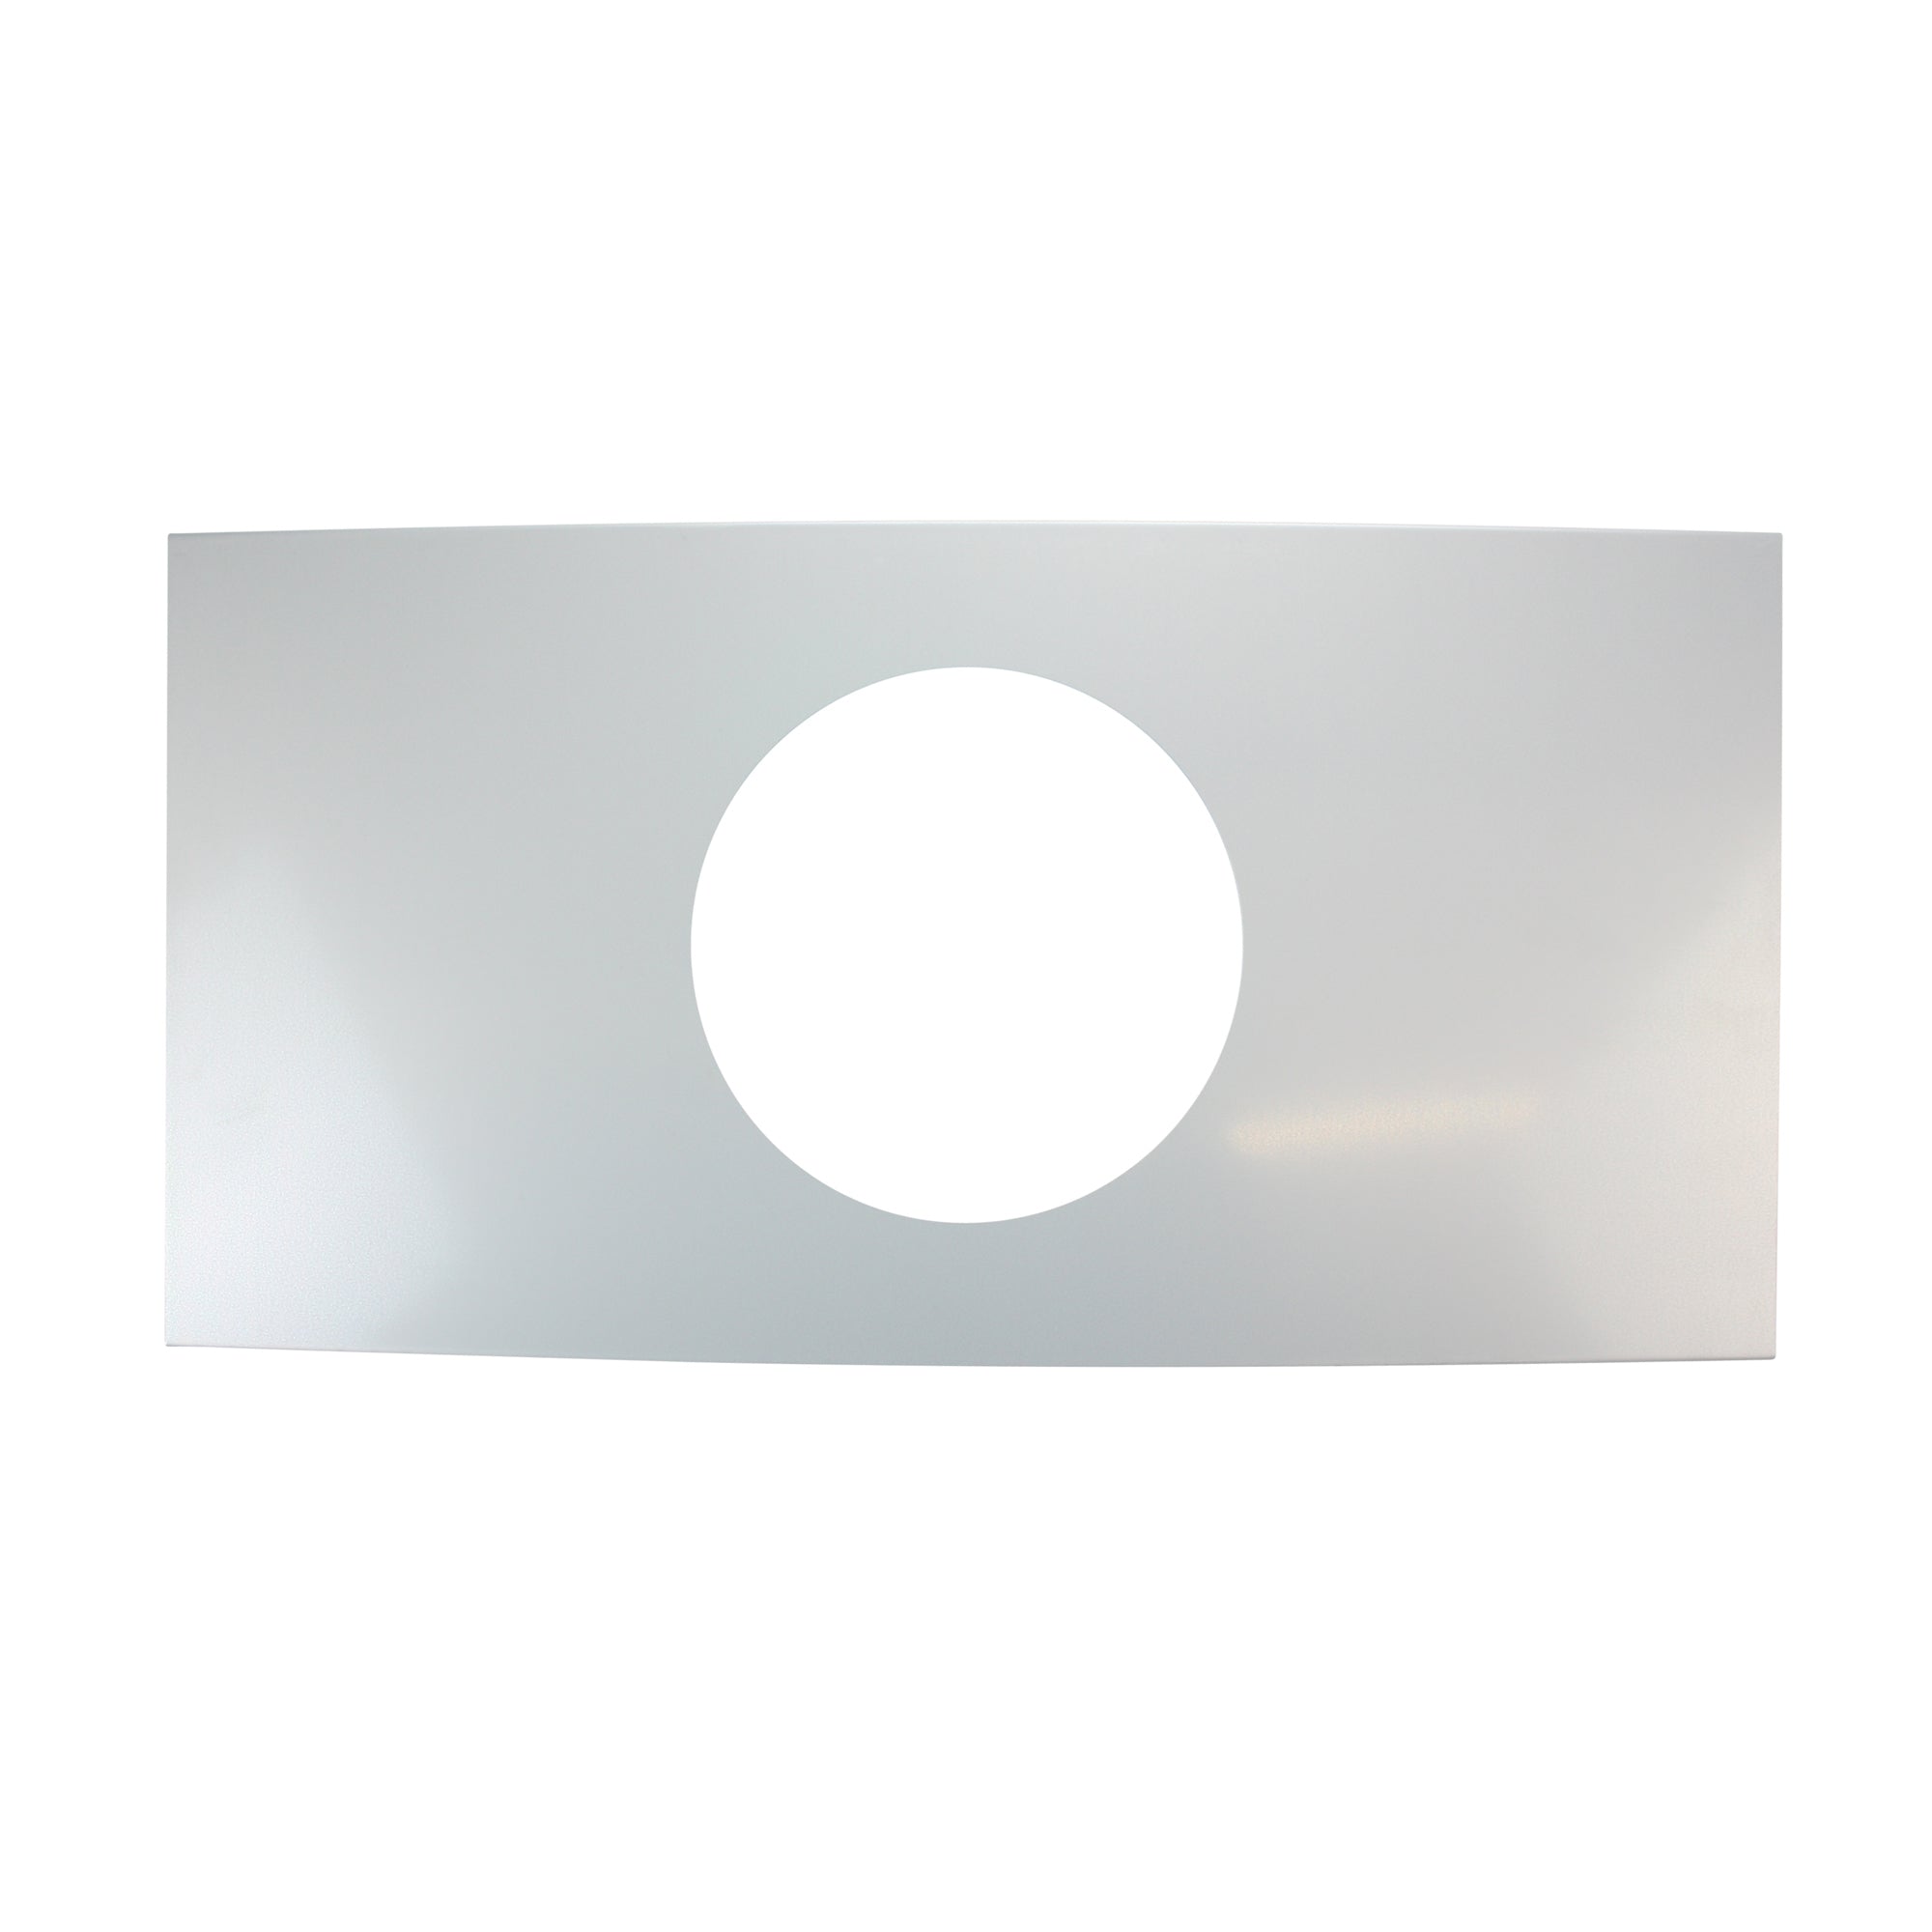 Ademco, ADEMCO 517082-7130 7" DROP CEILING MOUNTING PLATE FOR HONEYWELL CCTV DOMES